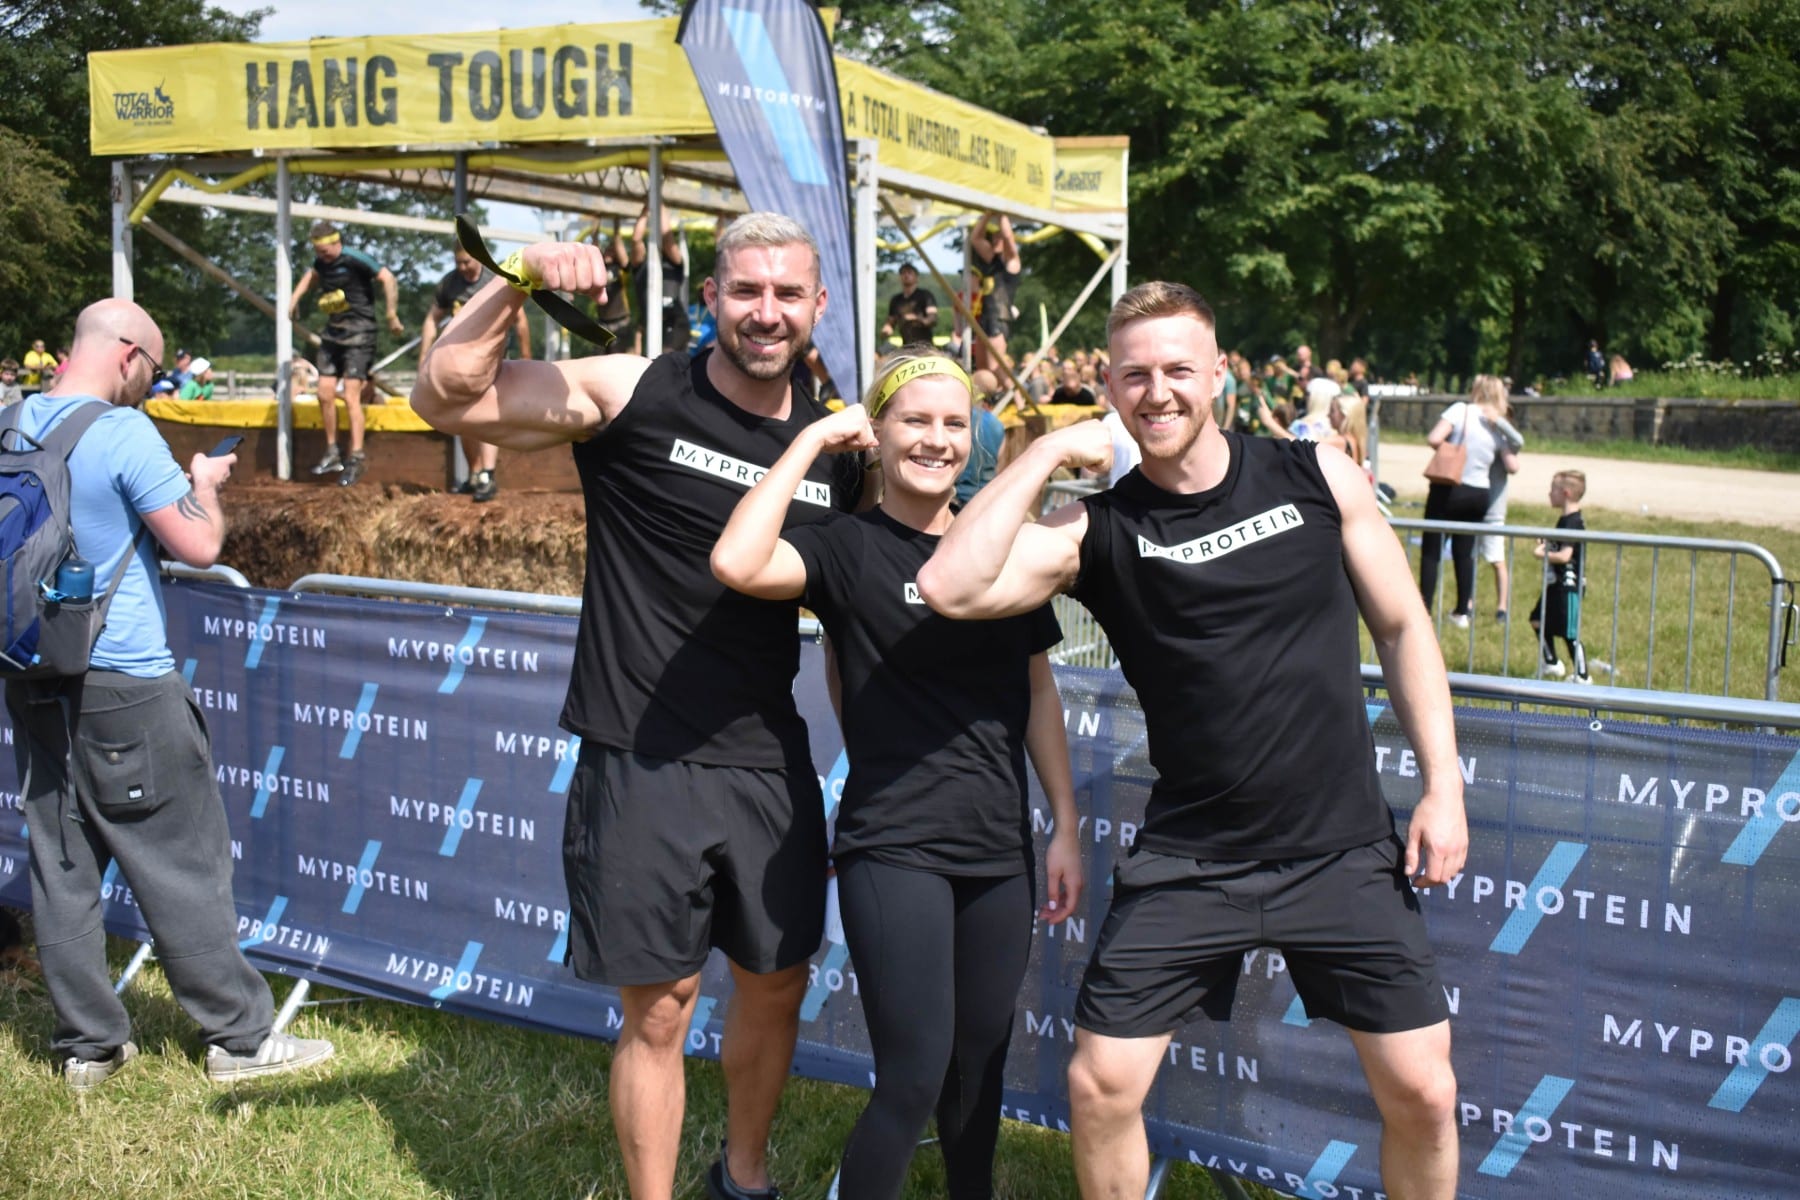 I Tried The Total Warrior Obstacle Course… This Is What Happened